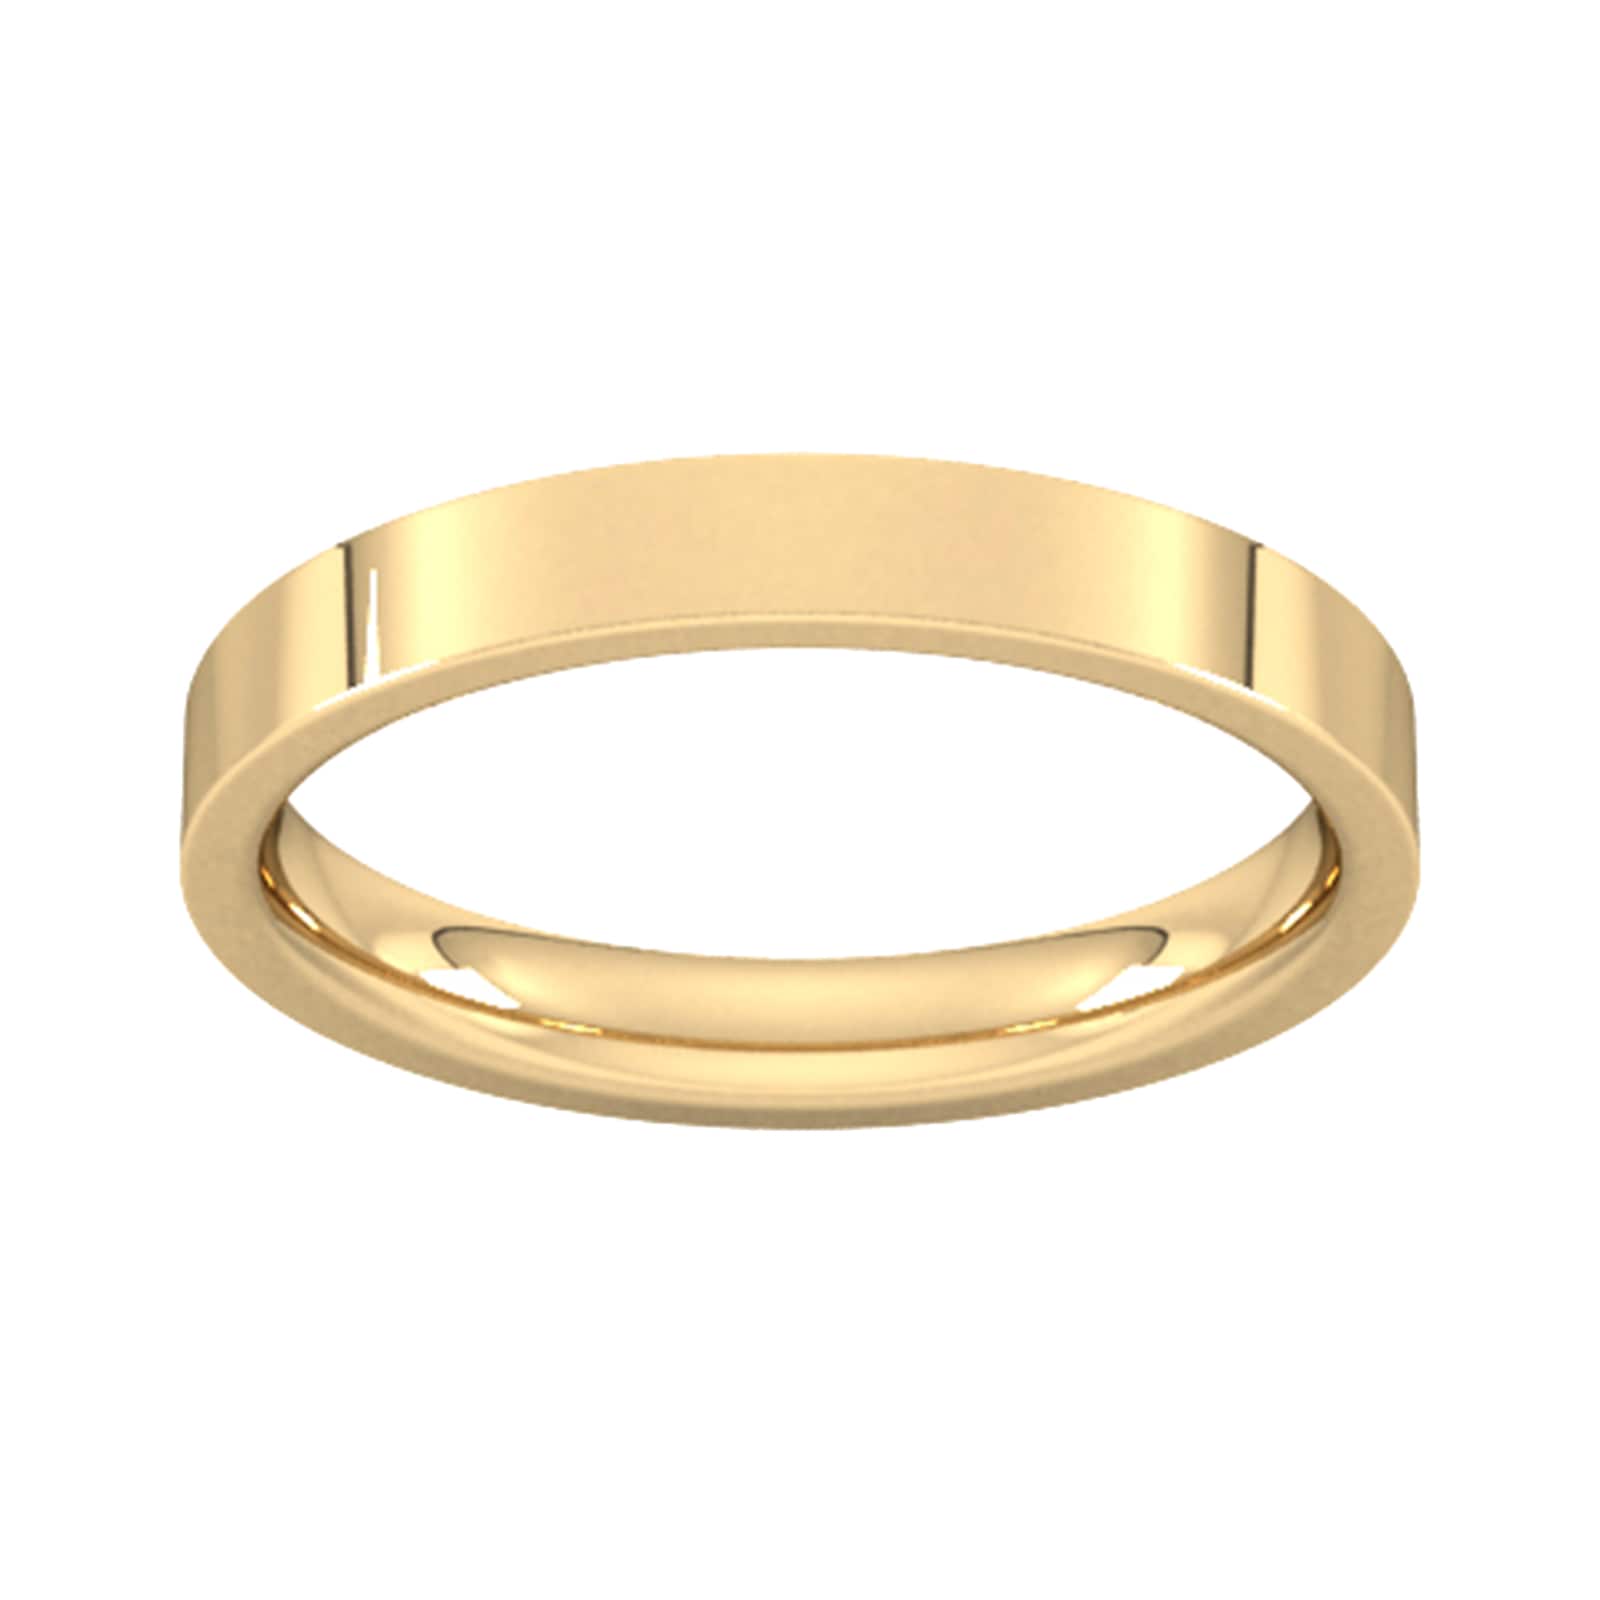 3mm Flat Court Heavy Wedding Ring In 9 Carat Yellow Gold - Ring Size O